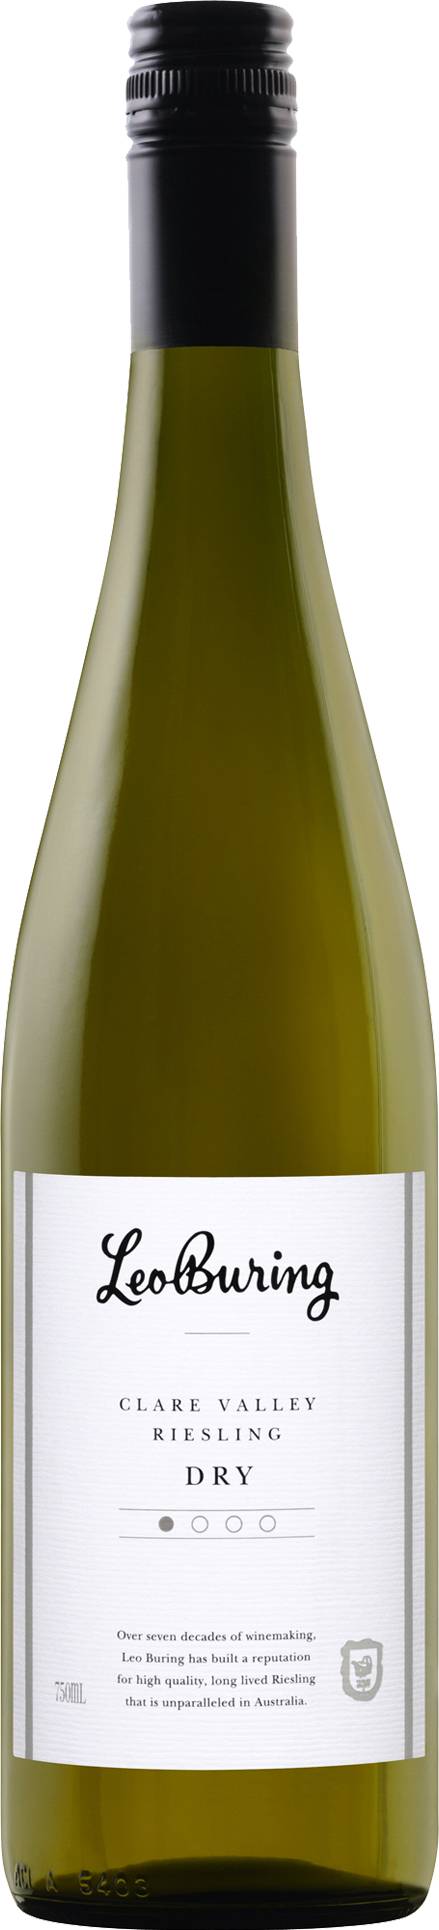 Leo Buring Clare Valley Riesling (museum) 2016 750ml